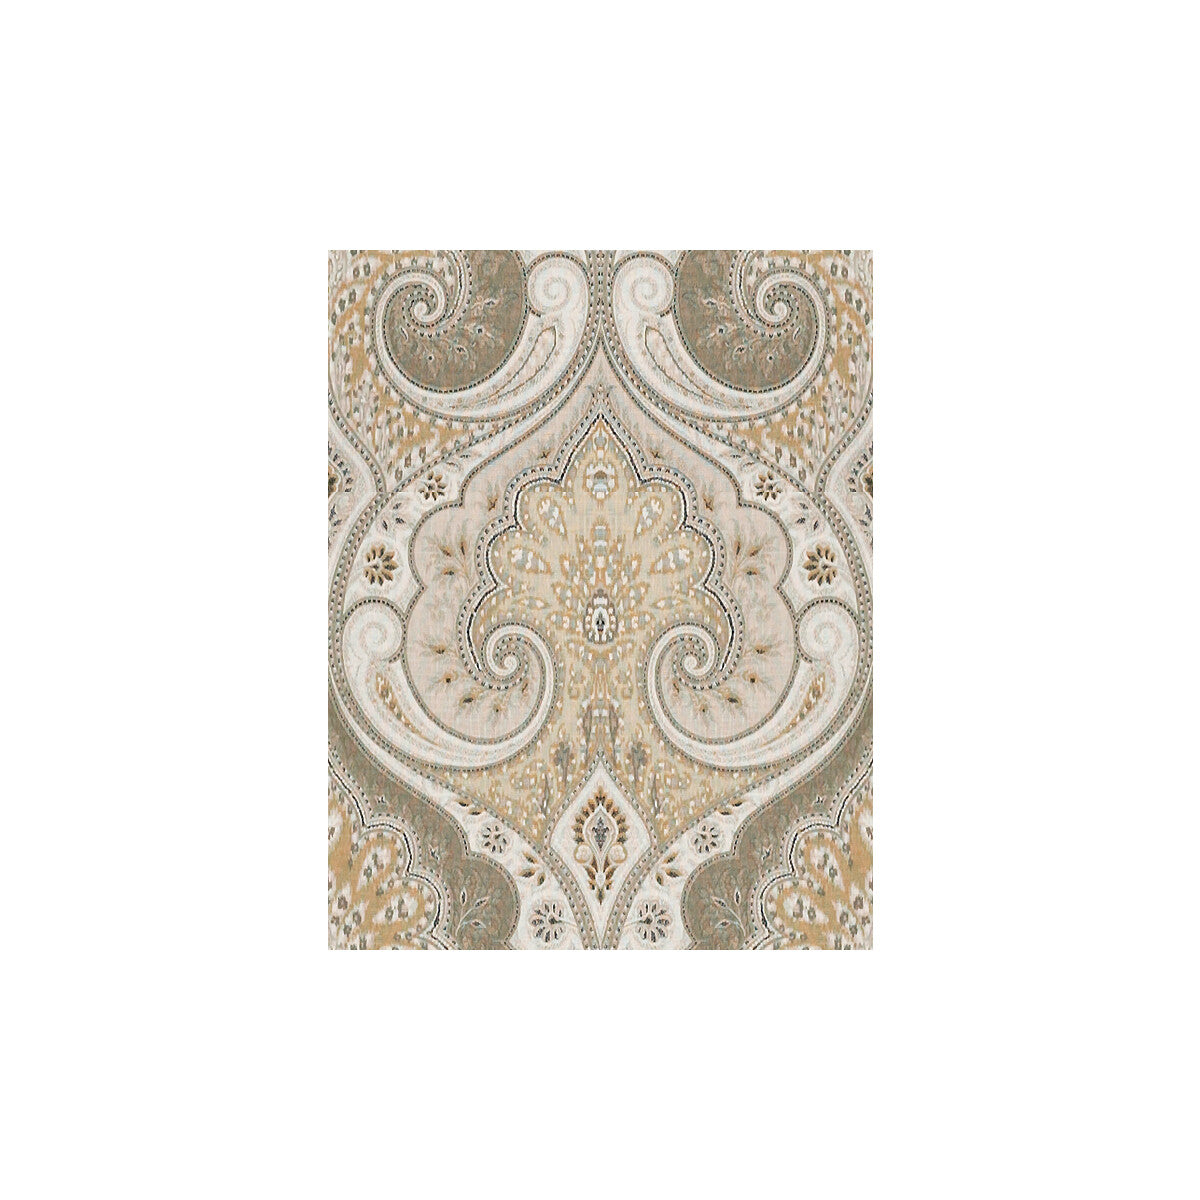 Latika fabric in stone/oatmeal color - pattern PP50321.4.0 - by Baker Lifestyle in the The Echo Design collection